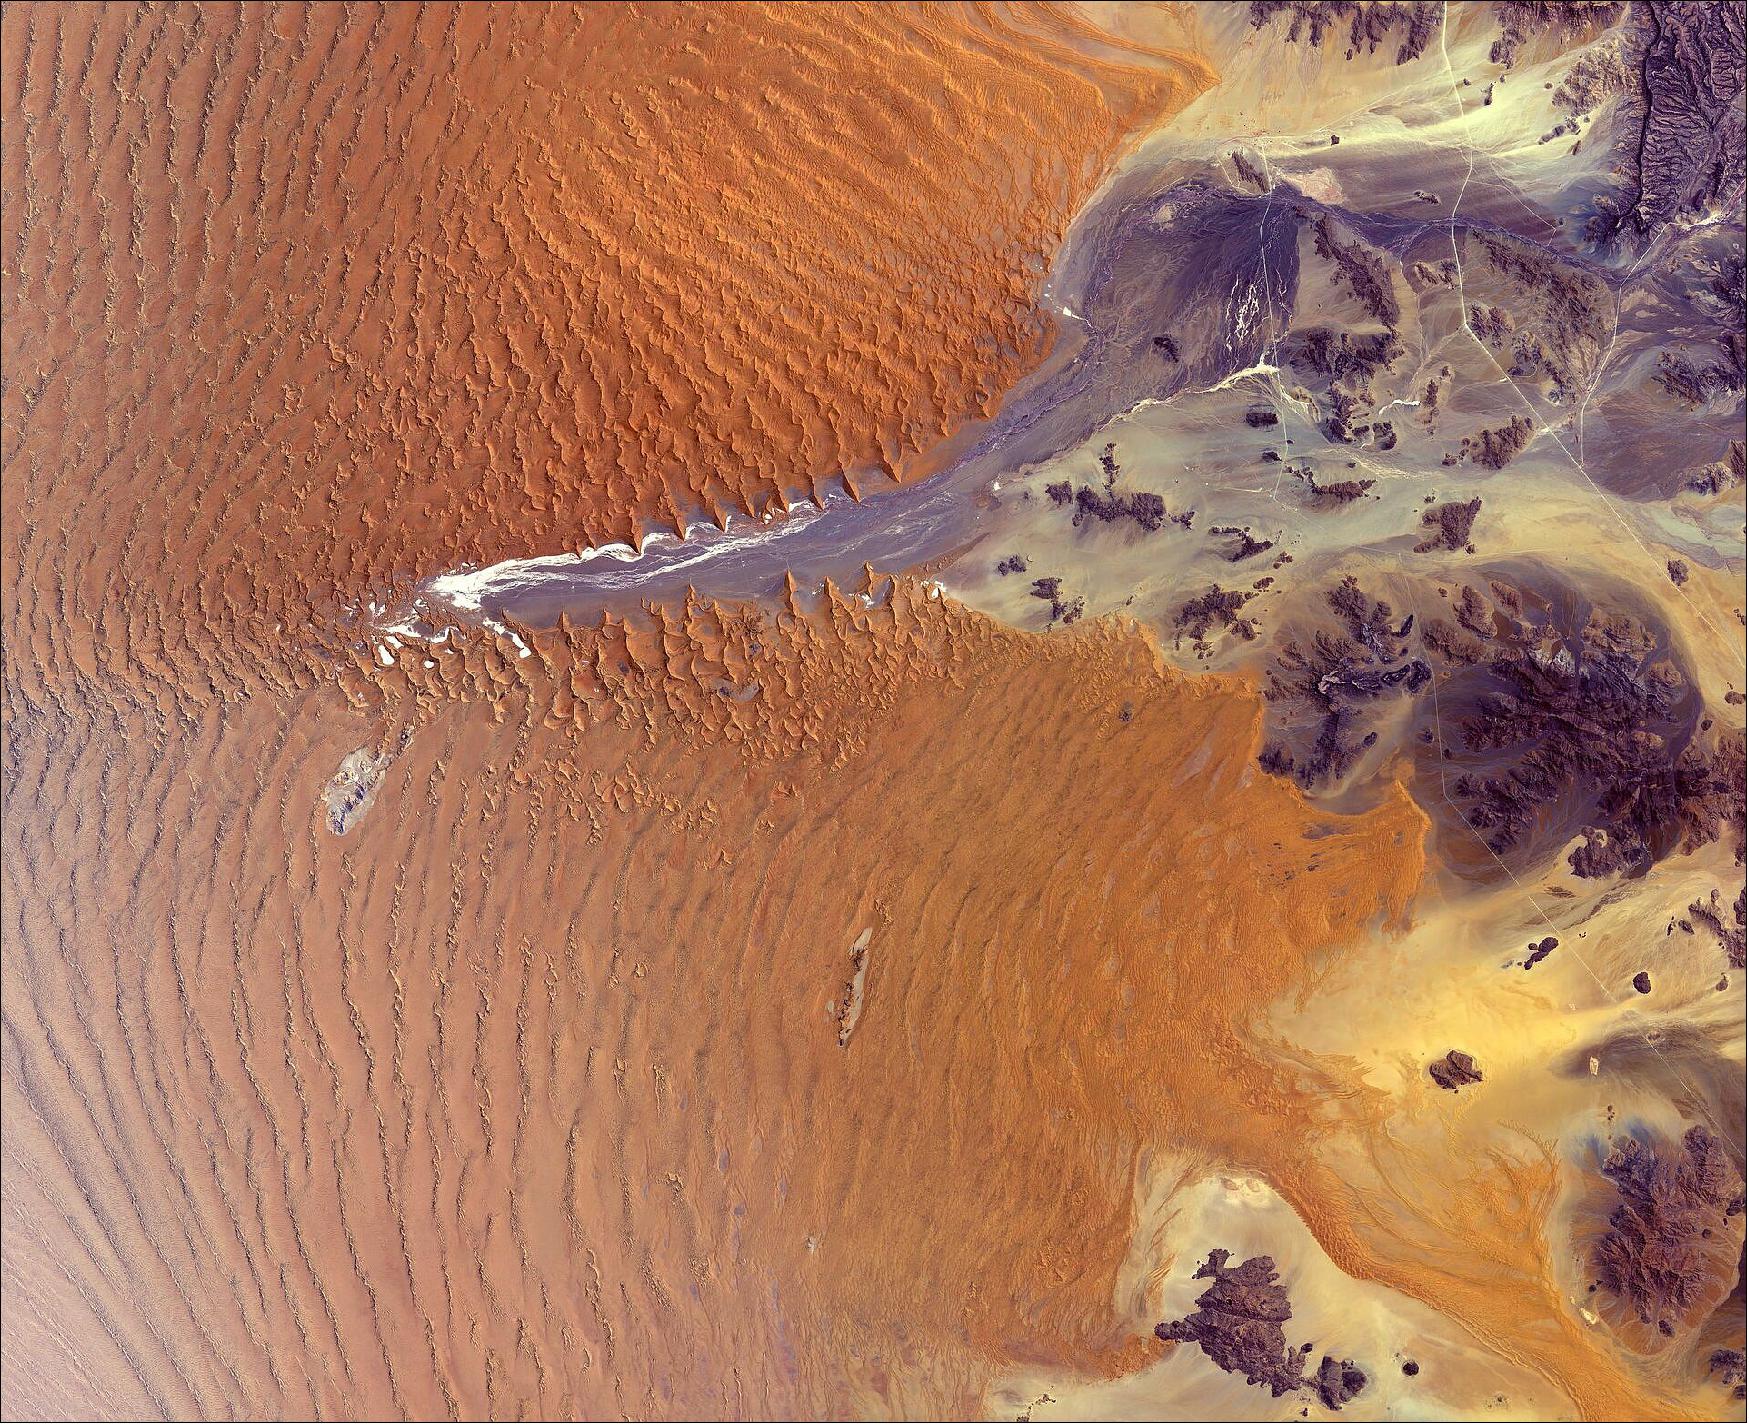 Figure 41: In this image, captured on 27 October 2019, a large portion of the Namib-Naukluft National Park is visible. The park covers an area of almost 50,000 km2 and encompasses part of the Namib Desert and the Naukluft Mountains to the east. Straight, white lines visible in the right of the image are roads that connect the Namib-Naukluft National Park with other parts of Namibia. This image is featured on the Earth from Space video program (image credit: ESA, the image contains modified Copernicus Sentinel data (2019), processed by ESA, CC BY-SA 3.0 IGO)